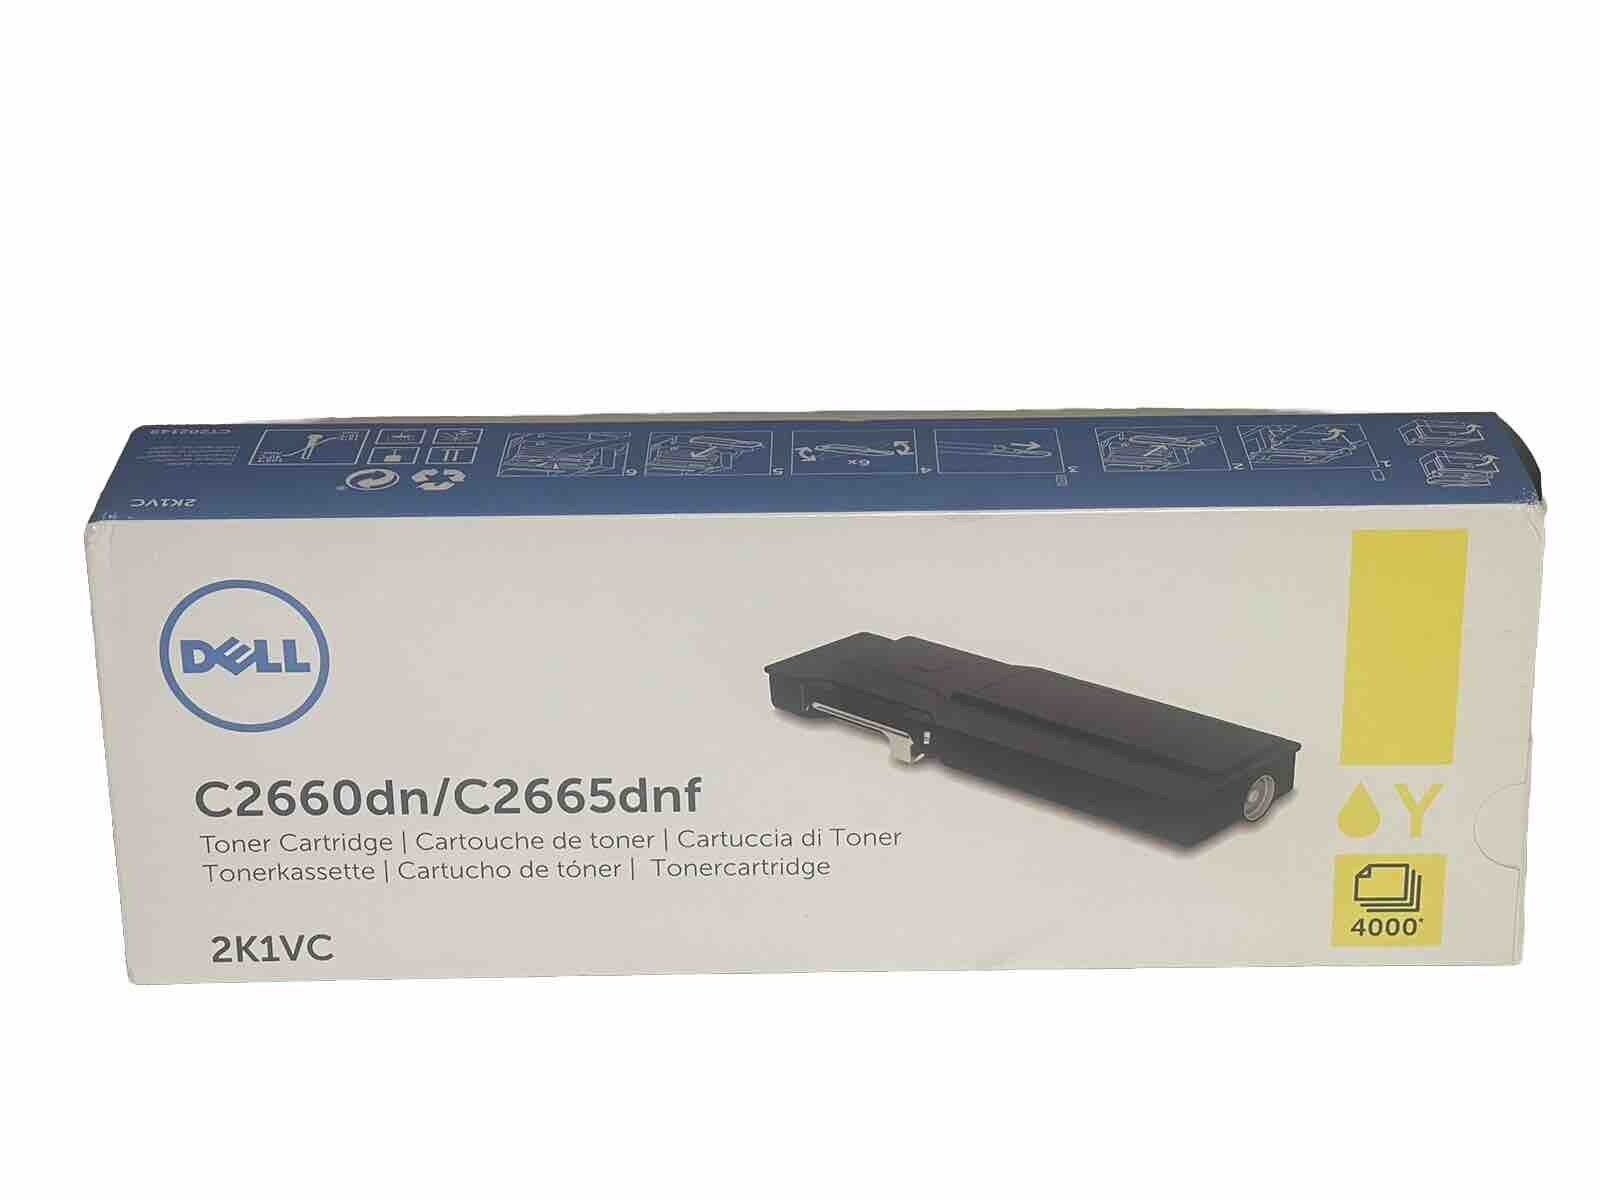 Genuine Dell C2660dn C2665dnf Yellow toner High Yield 4000 “Fast  “